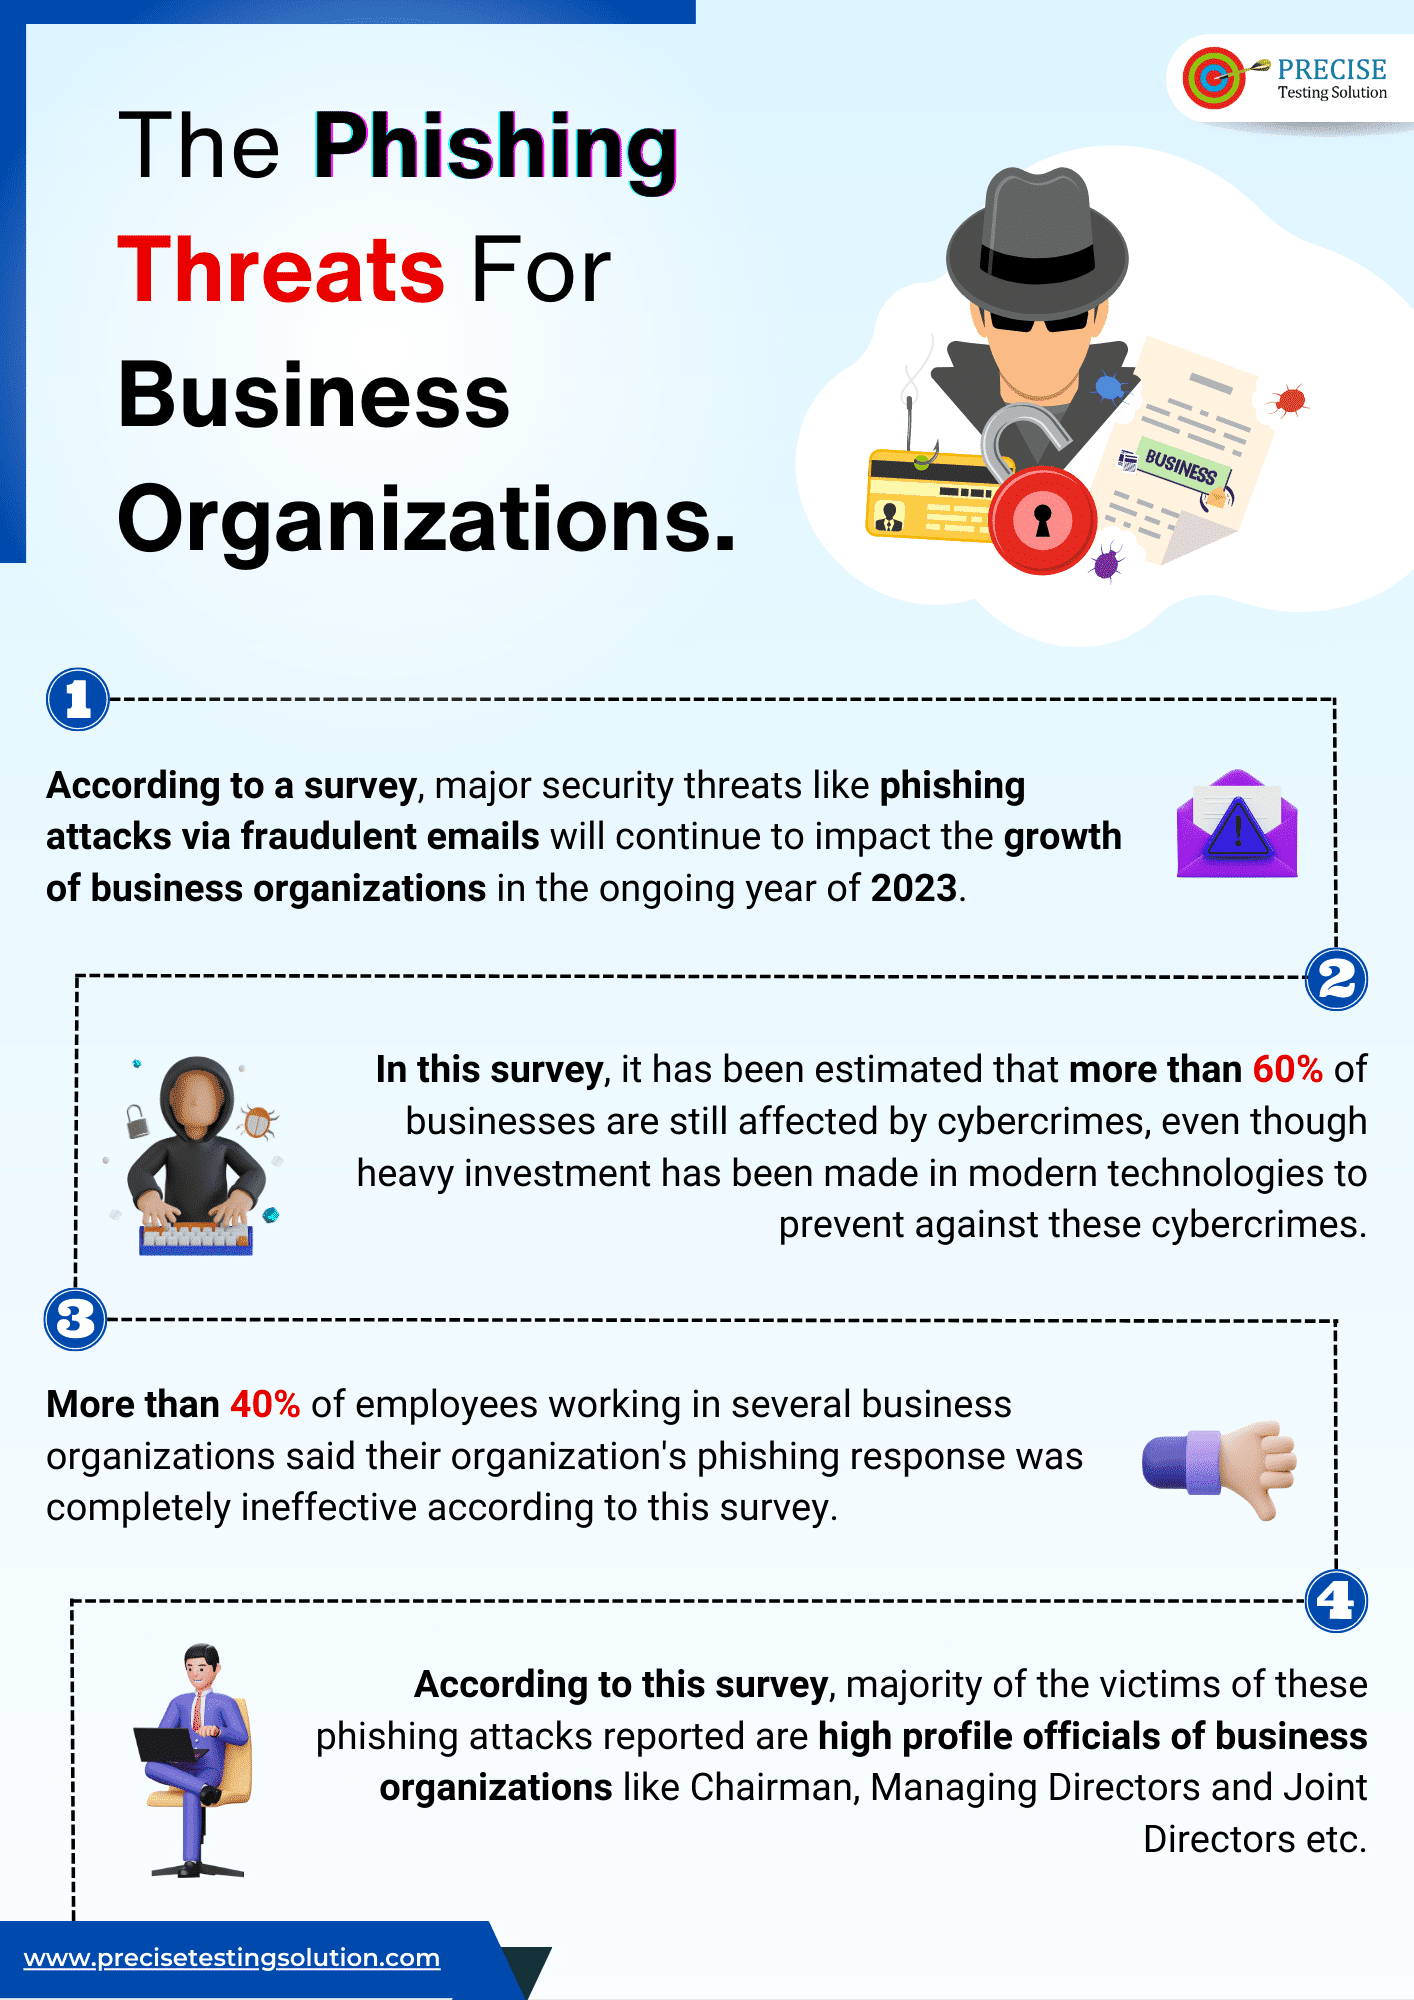 The Phishing Threats For Business Organizations